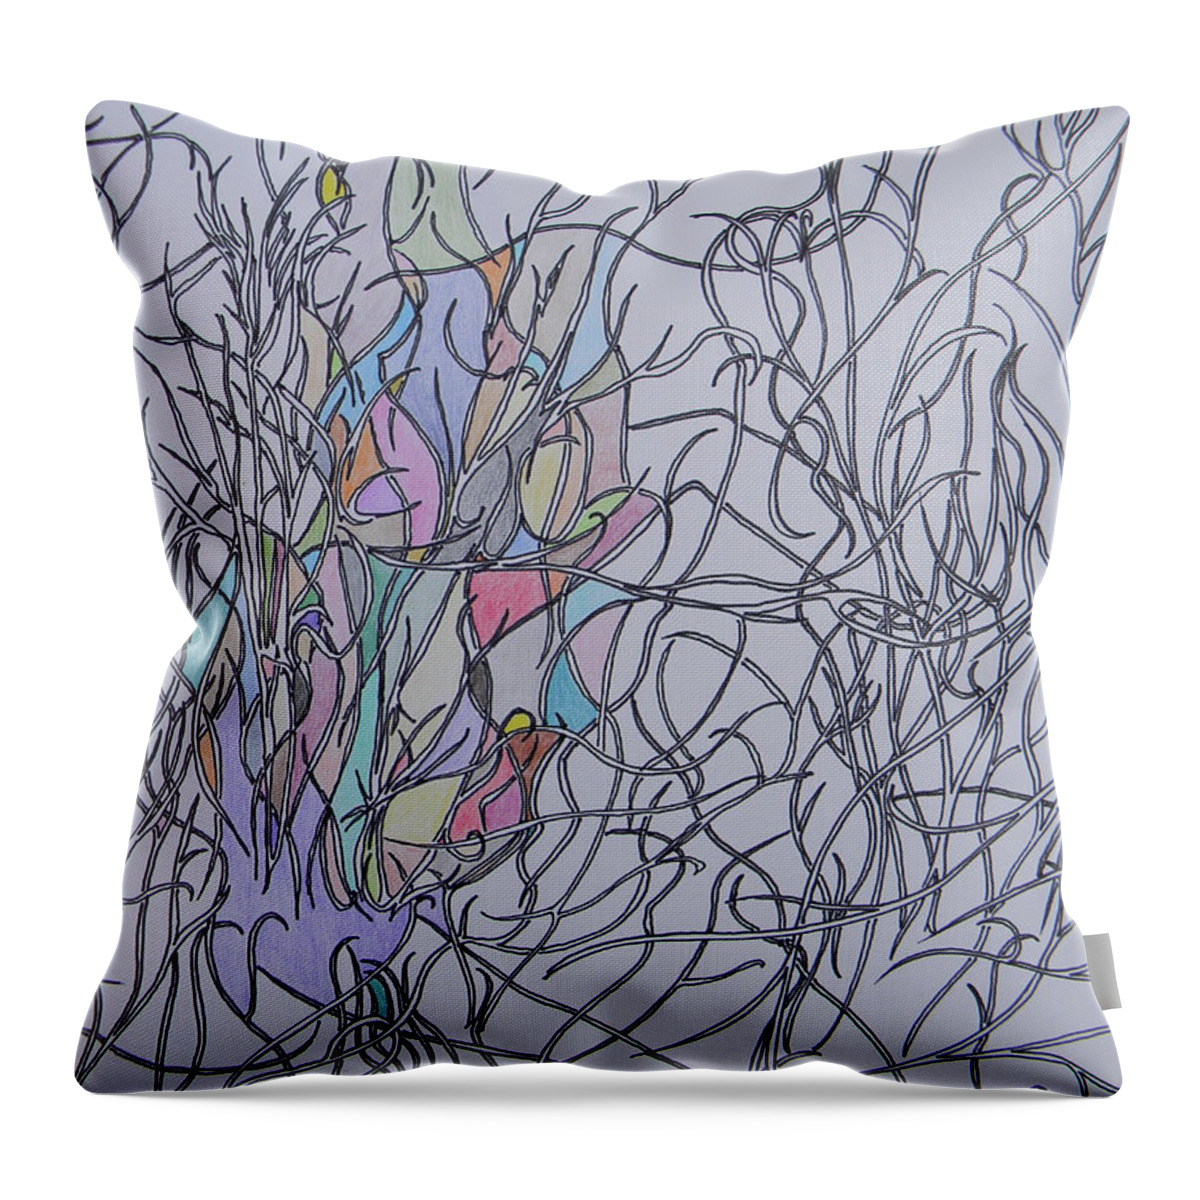 The Phoenix Throw Pillow featuring the drawing The Phoenix by Marwan George Khoury